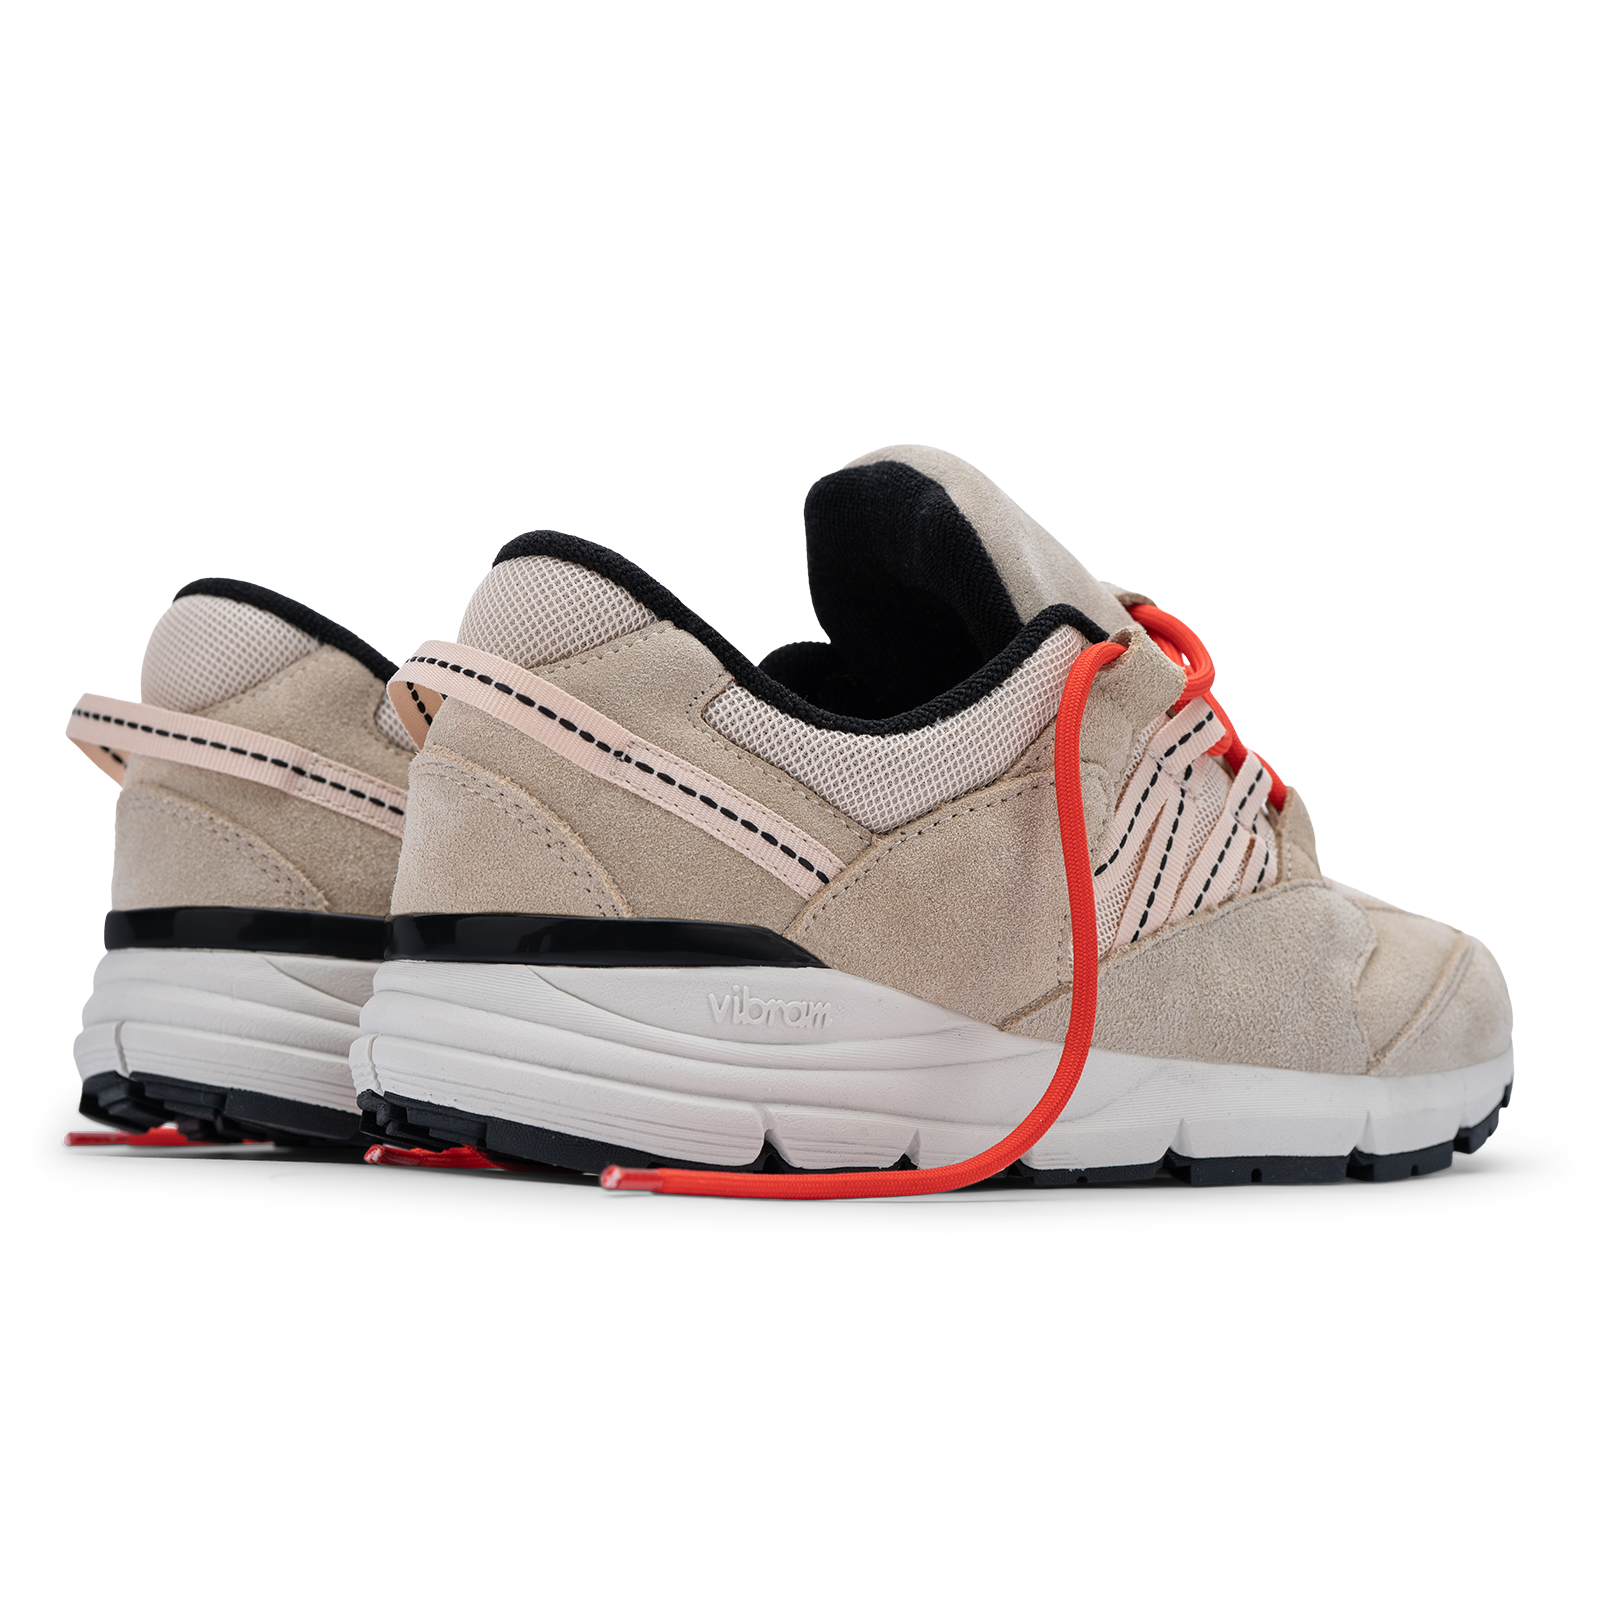 Altiutude / Safari back 3/4 view khaki suede / air mesh / webbing lace holder with orange lace on a vibram sole